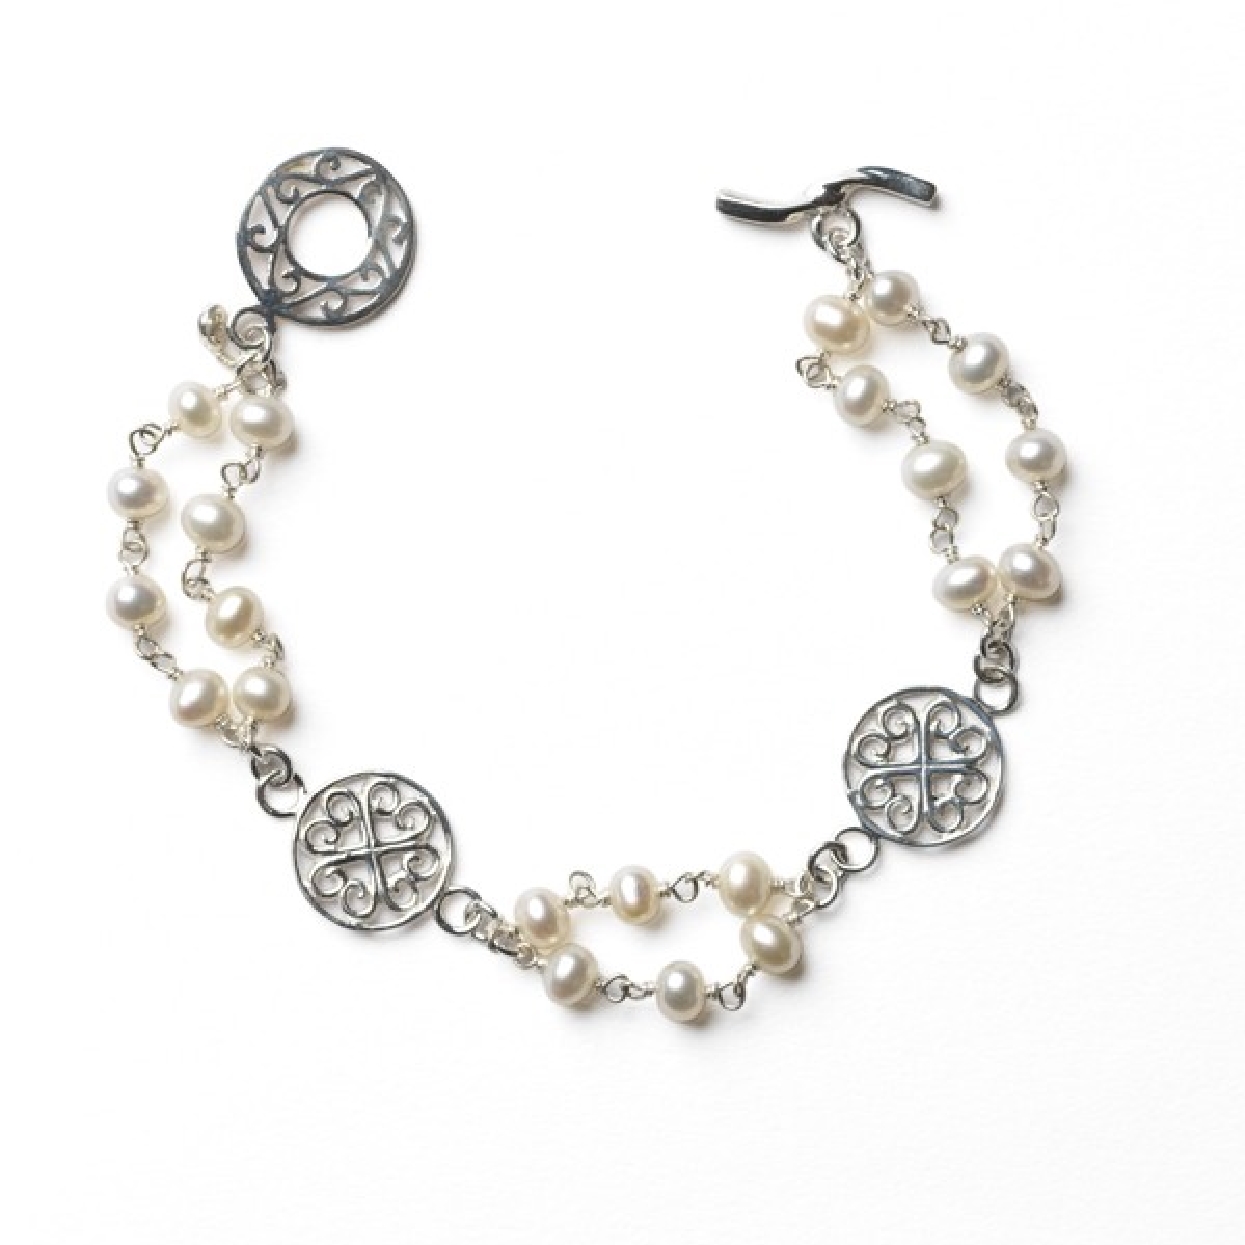 Southern Gates Sterling Silver and Double Pearl Strand Bracelet with Toggle Clasp

7.5 Inches in Length